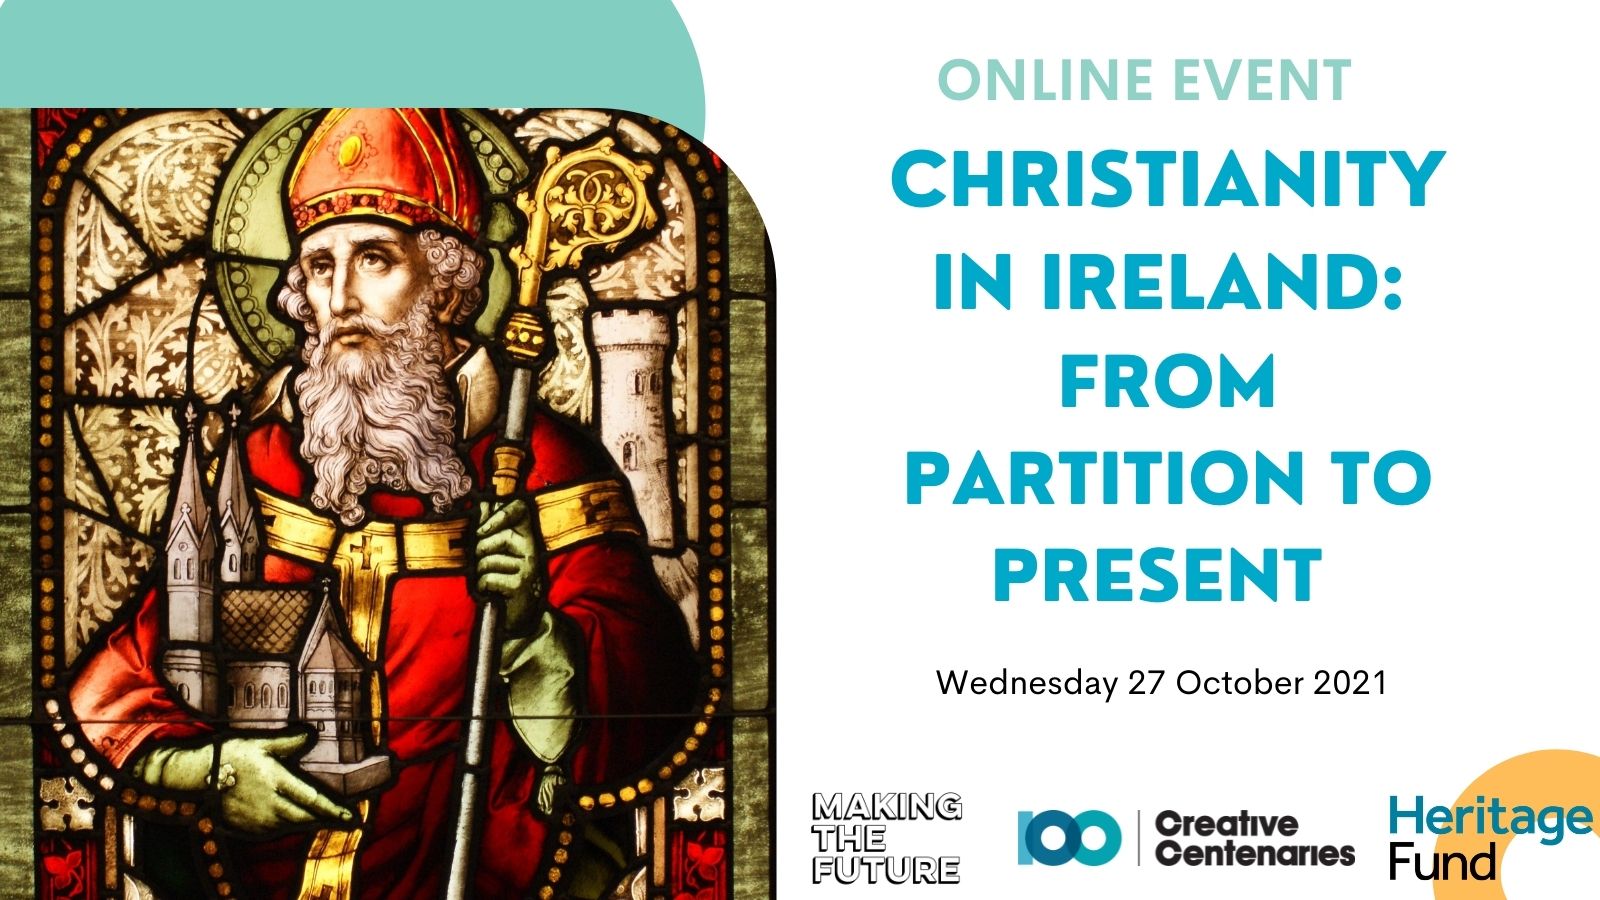 Christianity in Ireland: From Partition to Present